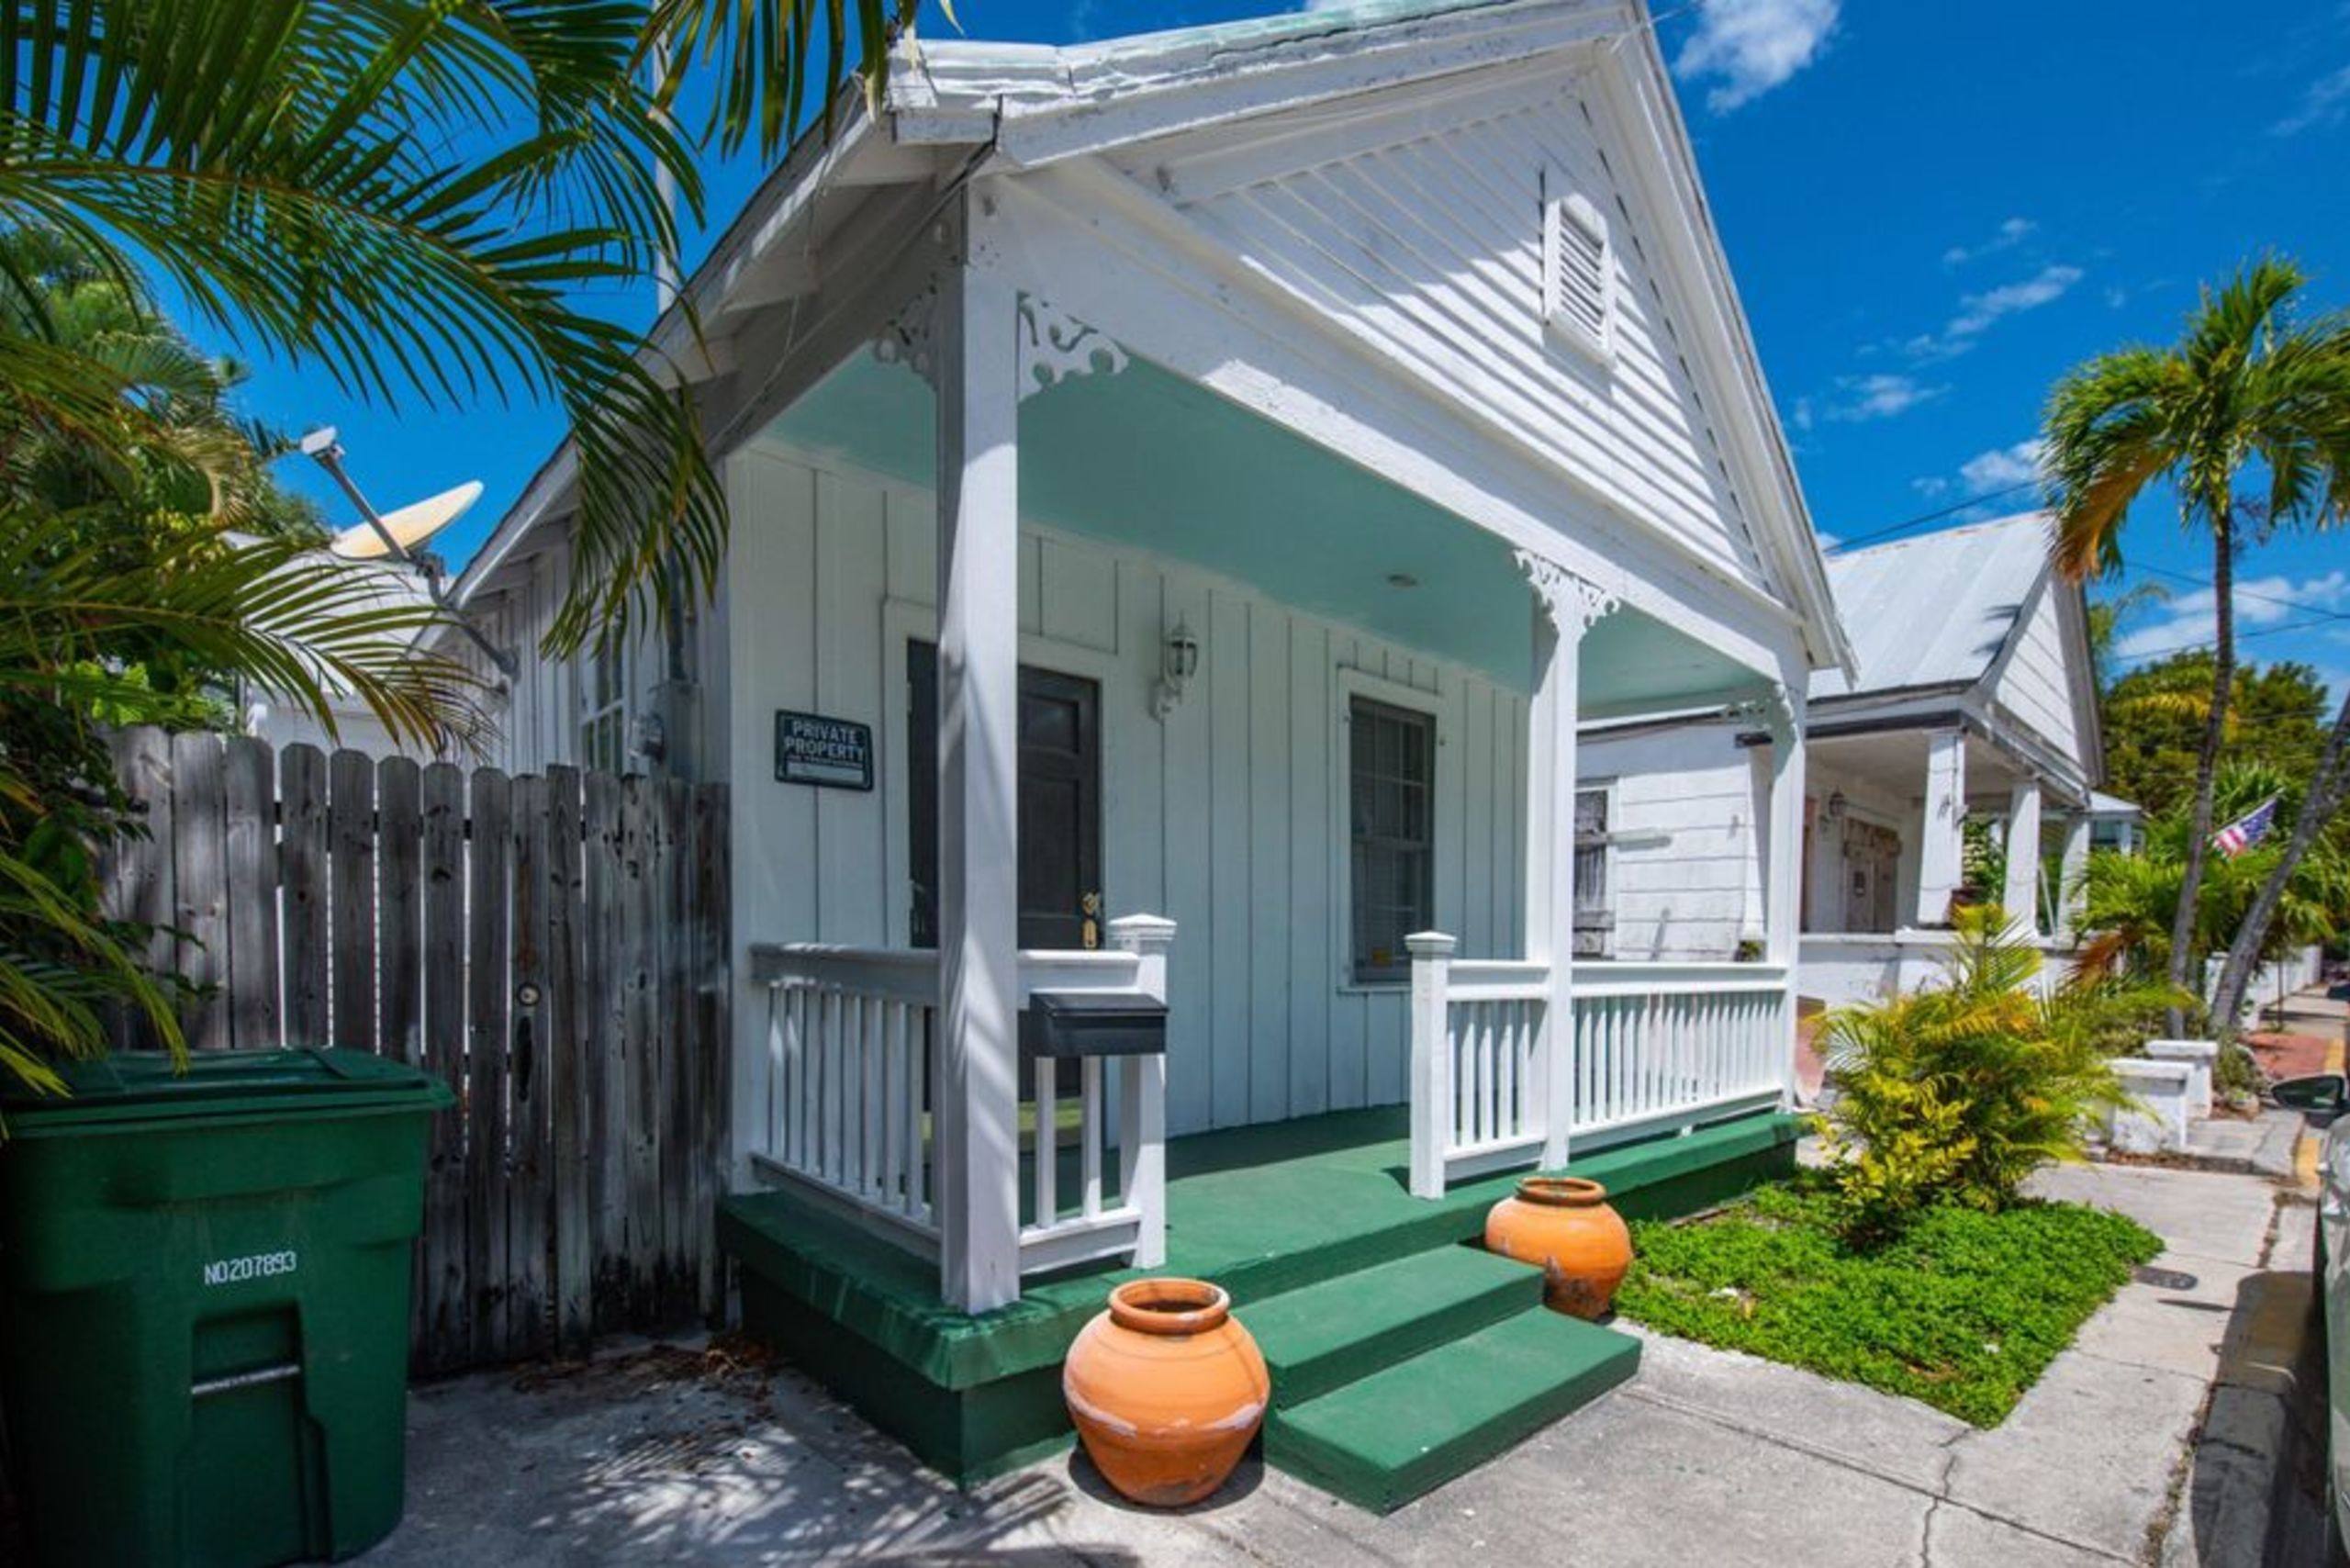 3 BR Home in Old Town Under $1m - 309 Olivia St.